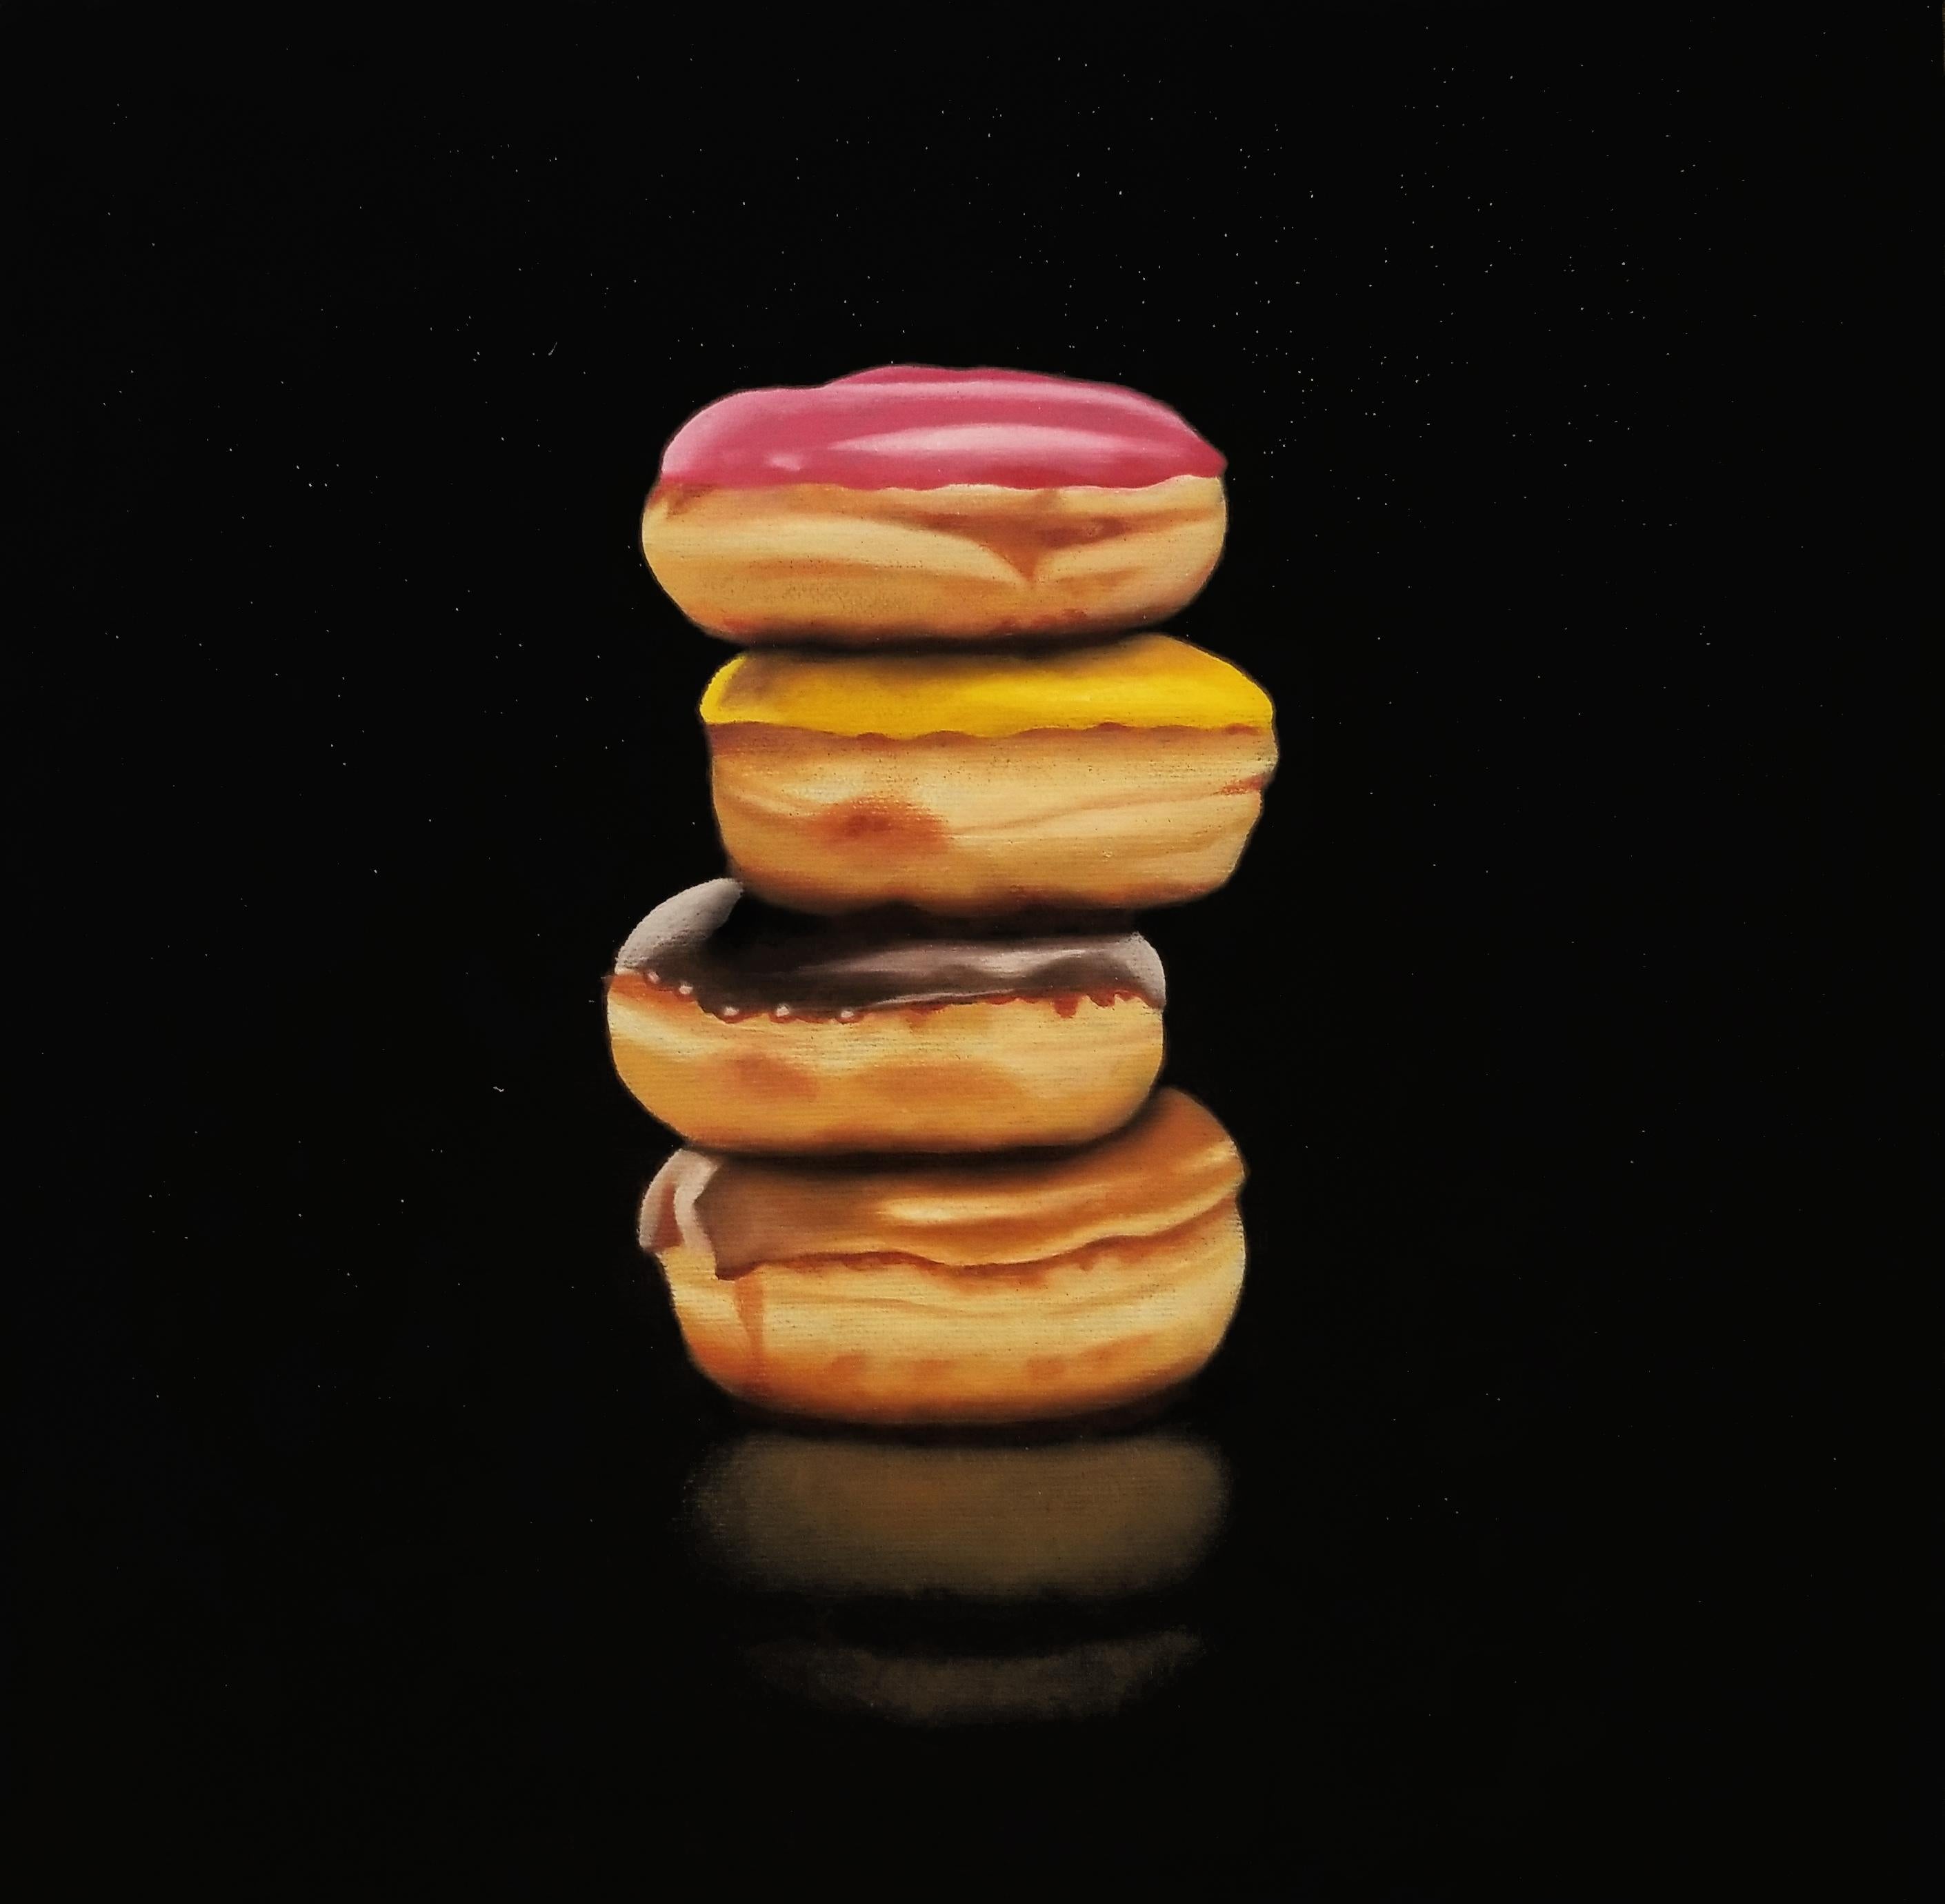 Erin Rothstein Interior Painting - "Stack of Donuts" - Original Photorealistic Painting on Canvas